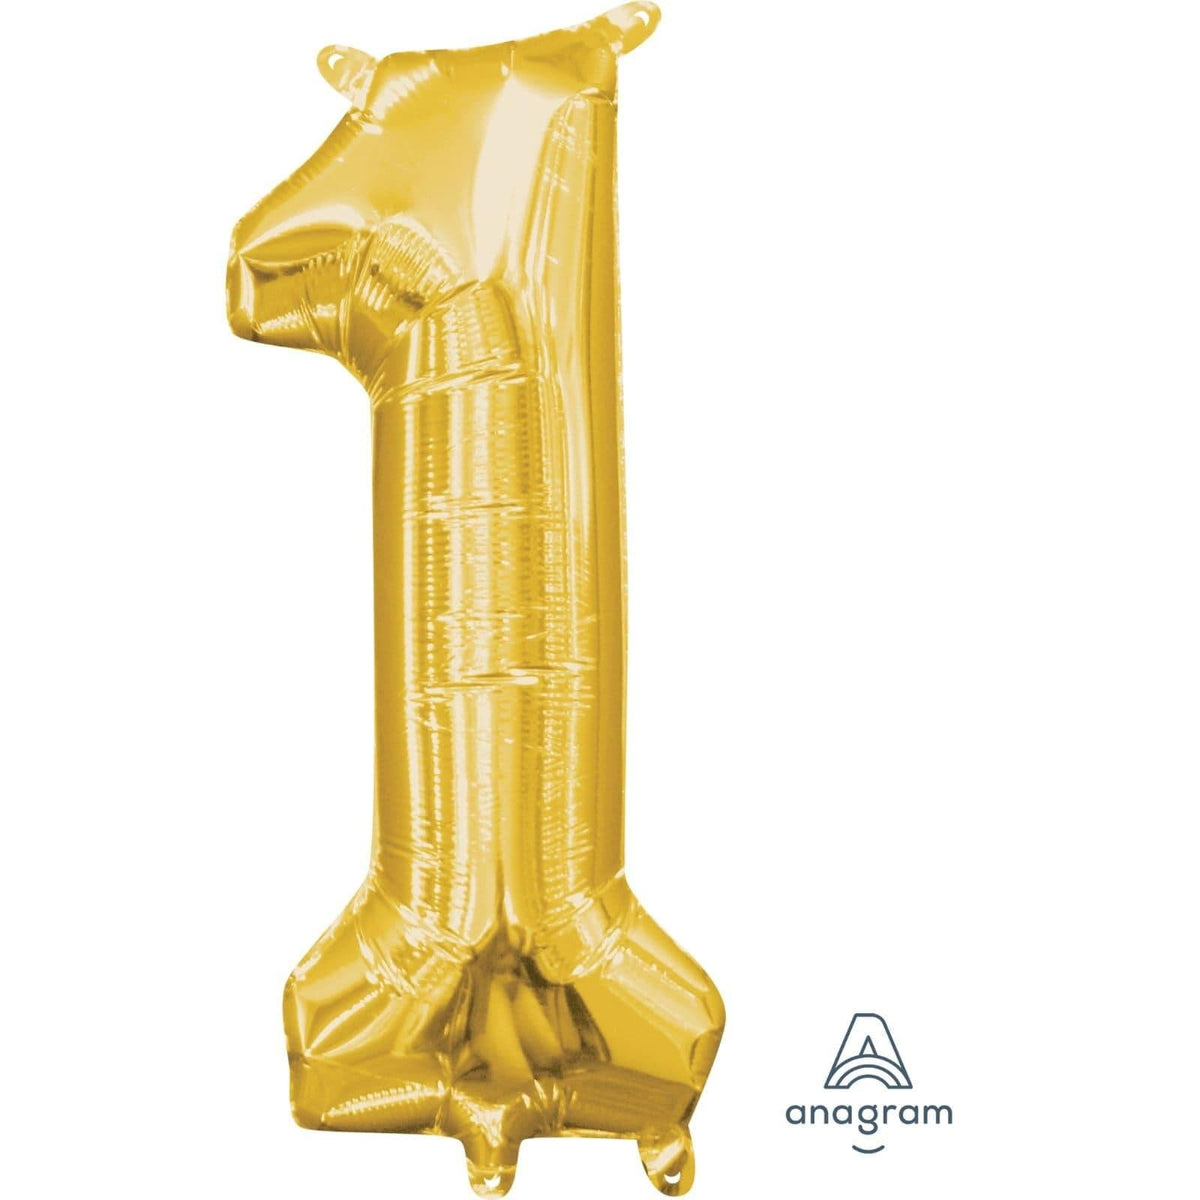 Buy Balloons Gold Number 1 Foil Balloon, 16 Inches sold at Party Expert